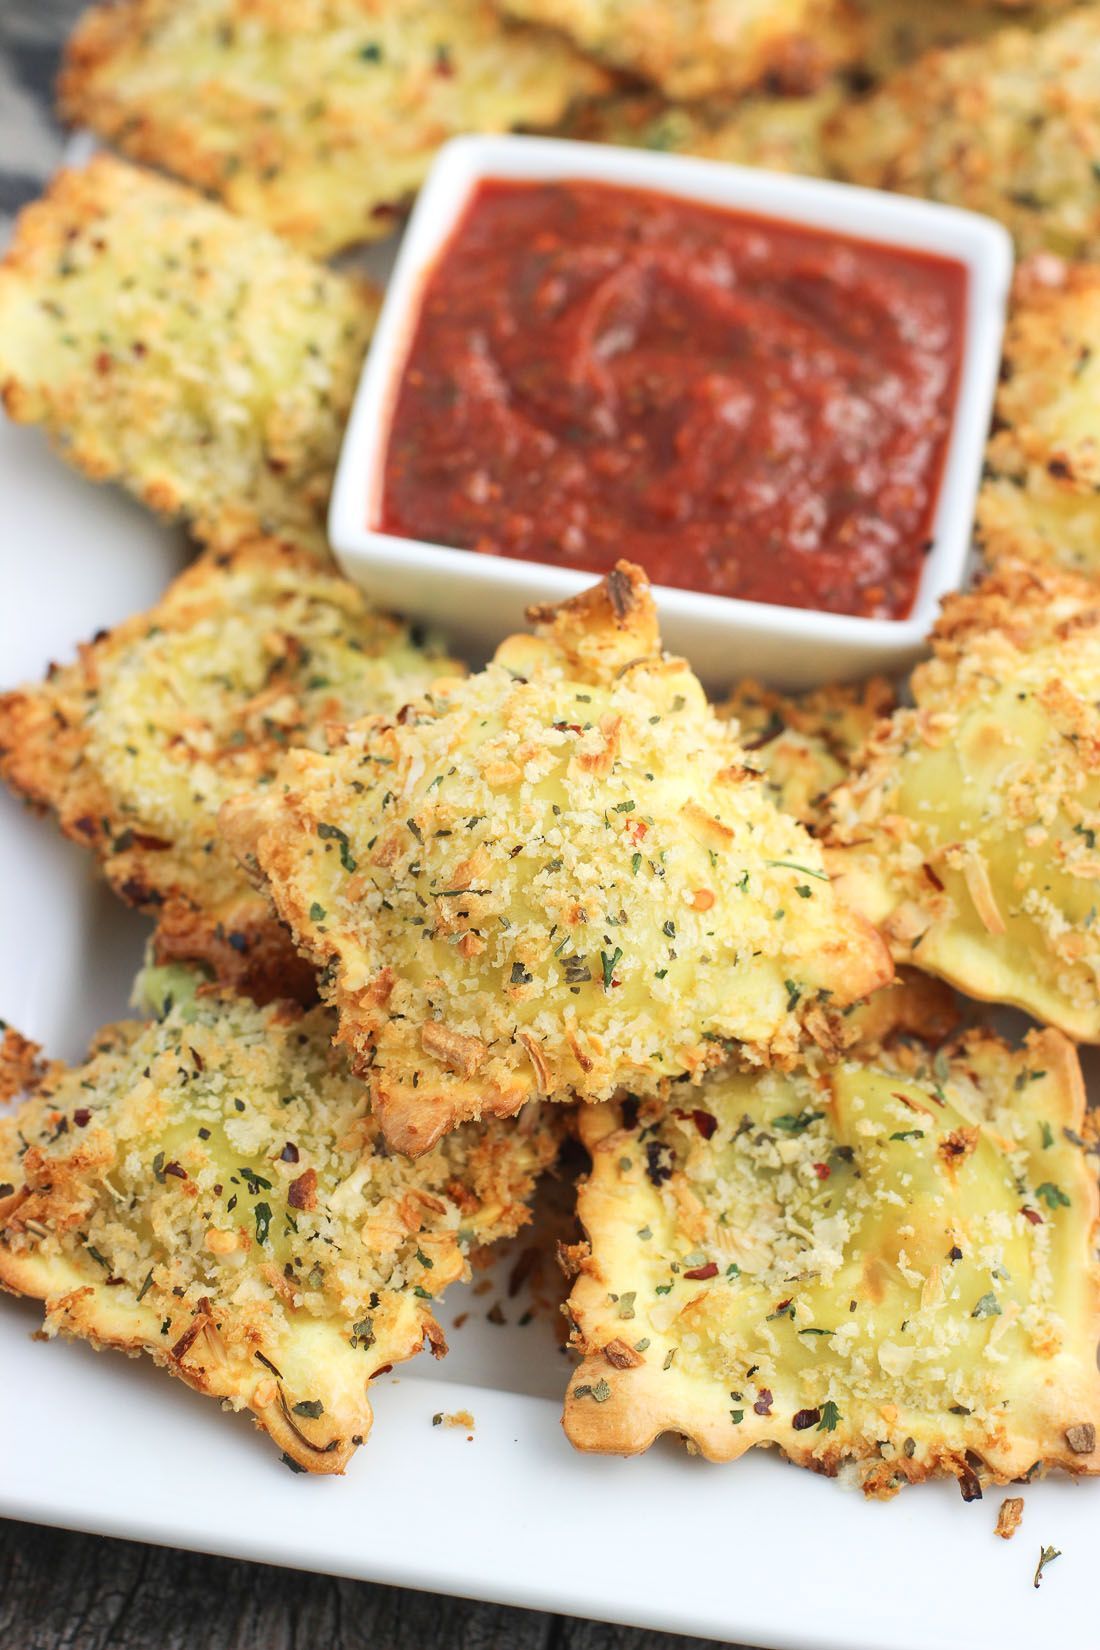 This easy recipe for crispy and baked toasted ravioli is a favorite! Ravioli is co